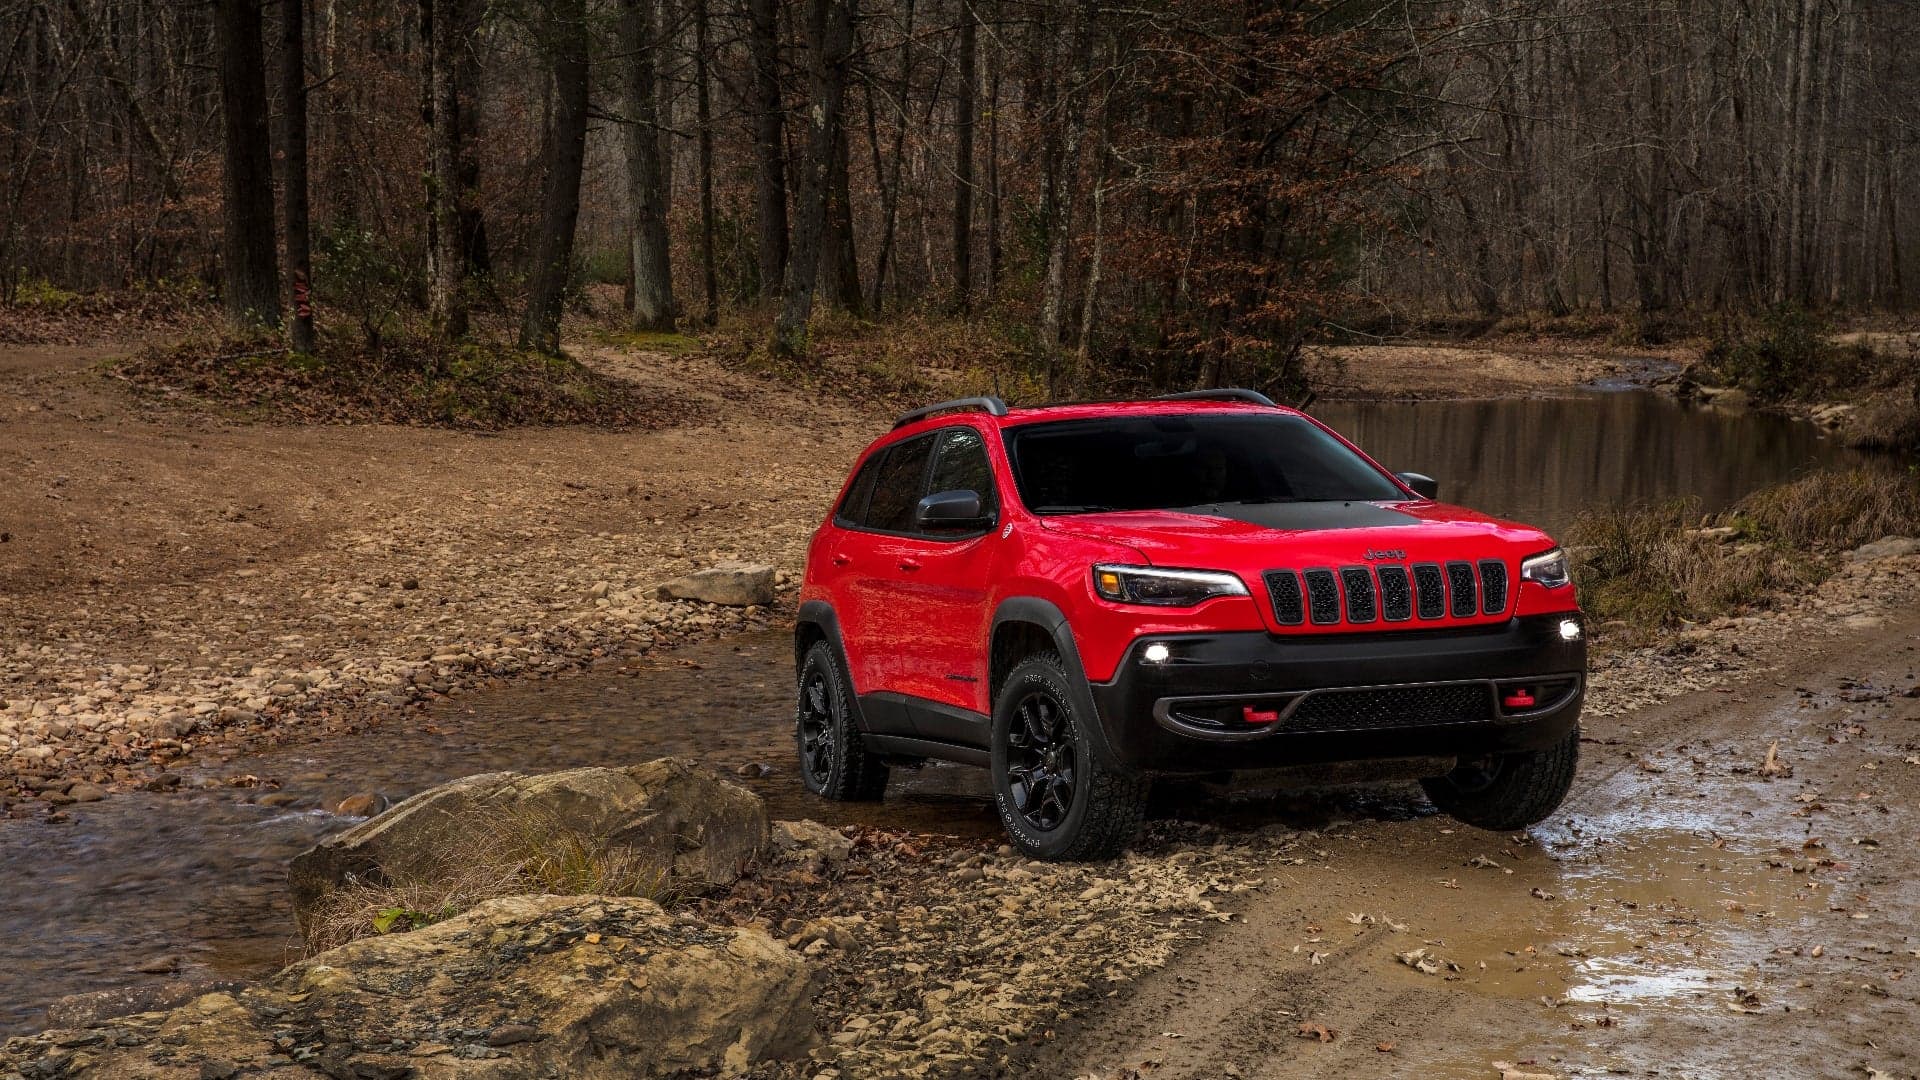 2019 Jeep Cherokee Unveiled Ahead of Detroit Auto Show Debut